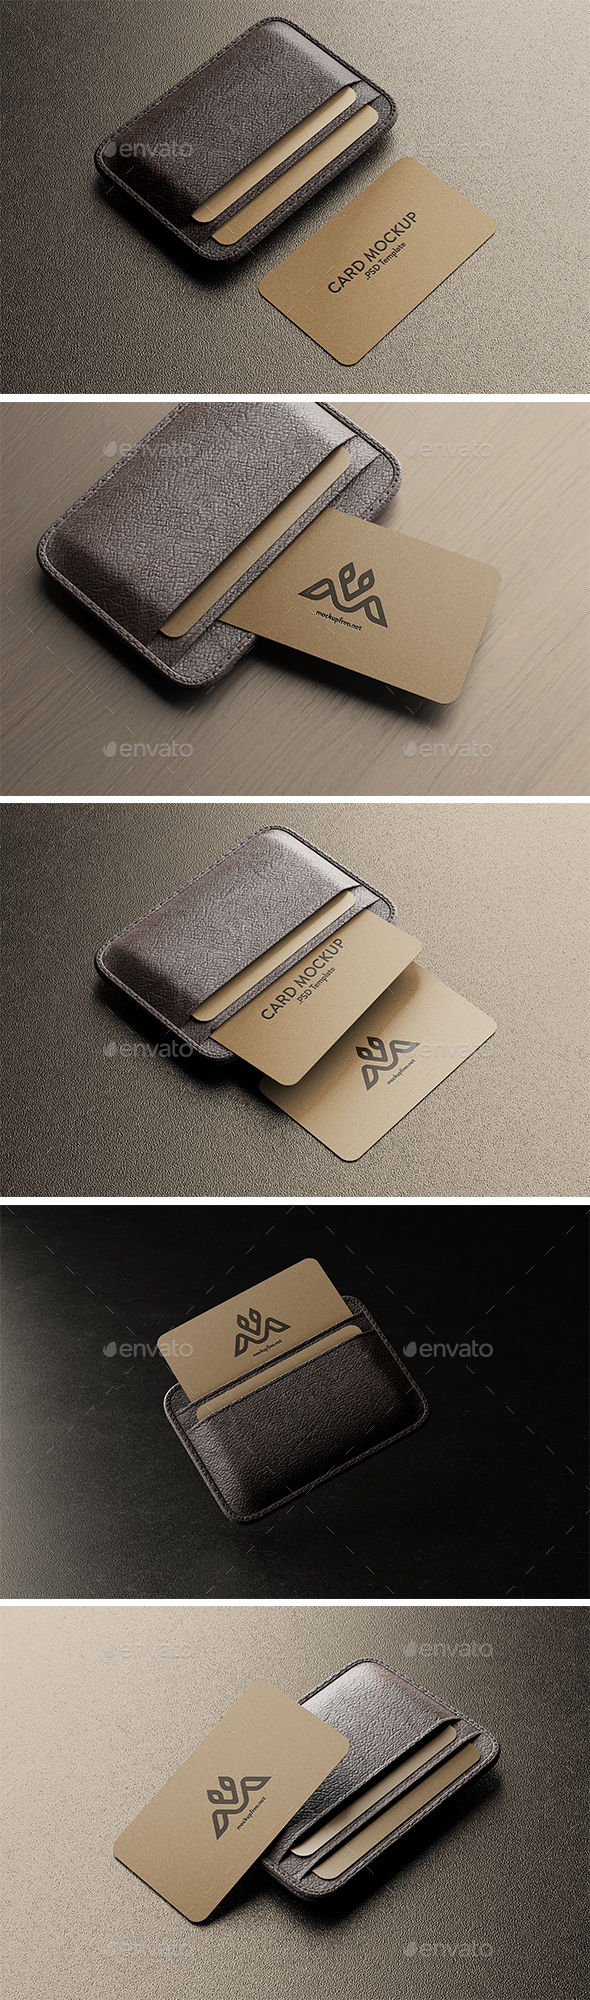 [DOWNLOAD]Business Cards with Leather Holder Mockup